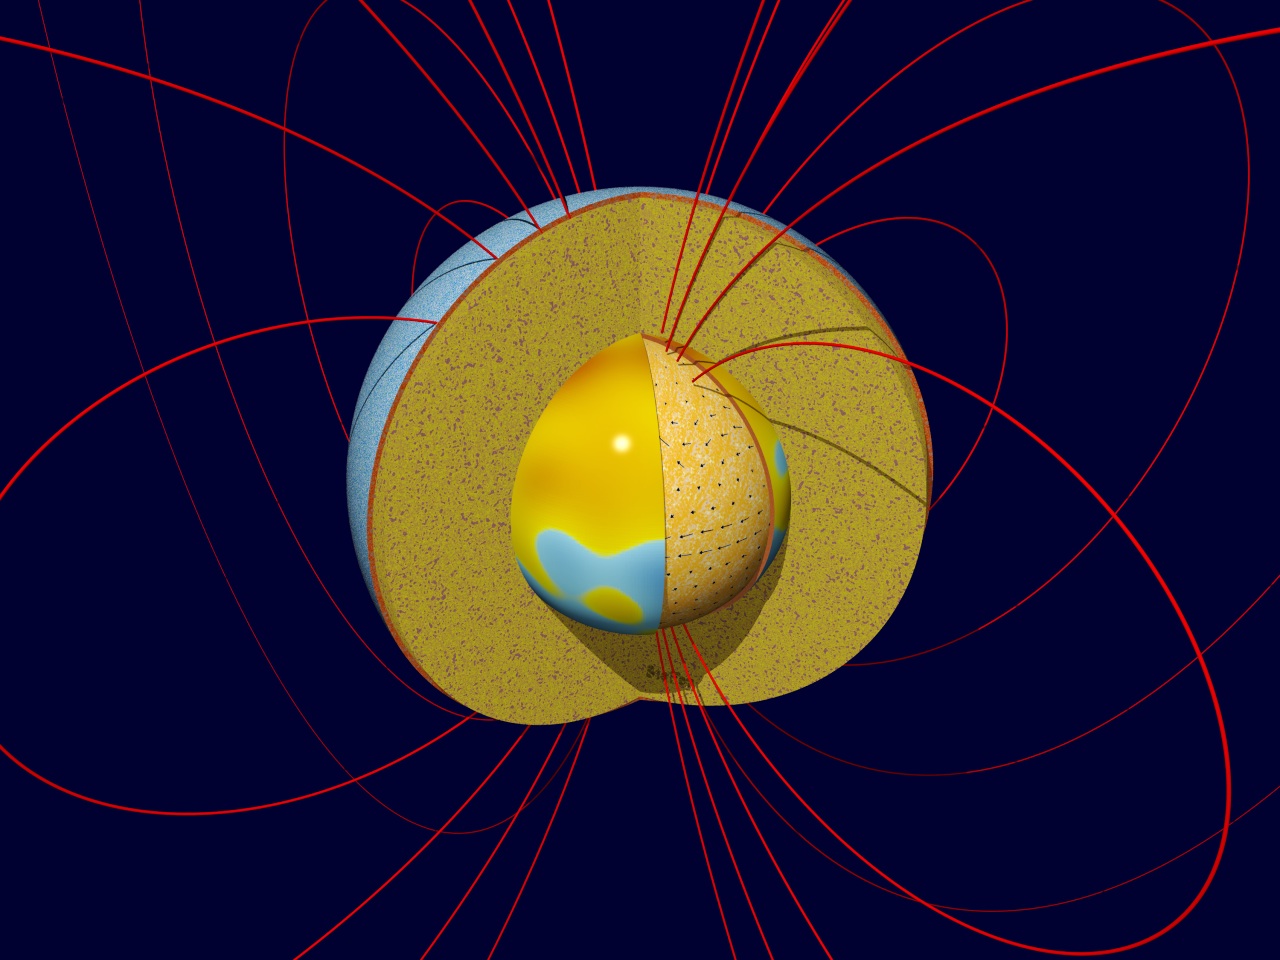 Enlarged view: Figure 1: Cut-out of the Earth, illustrating the source of the magnetic field in the core. On the left part of the core is contoured the strength of the radial magnetic field $B_r$, warm colours indicating the intensity of field linesentering the core and cold colours indicating the intensity of field linesexiting the core; the region of reverse flux below the South Atlantic can just be seen.The tangential component of the fluid motion partly responsible for the secular variation is illustrated on the right section of the core. (Courtesy S. Rau).